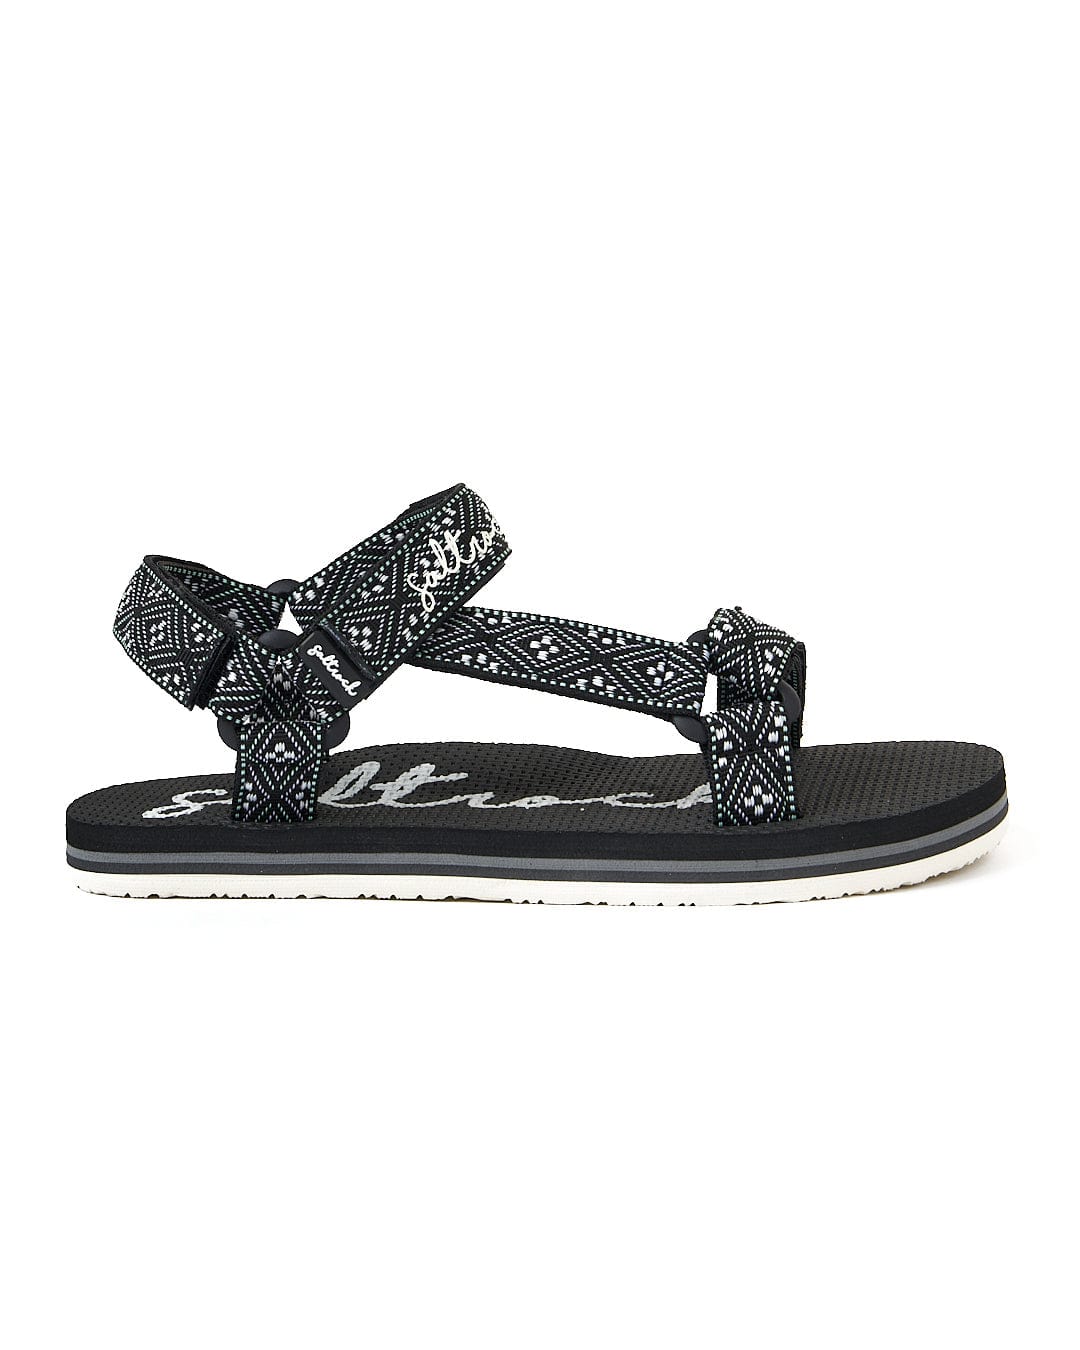 A pair of Saltrock Path Finder - Webbing Sandal - Black with a white polka dot pattern.